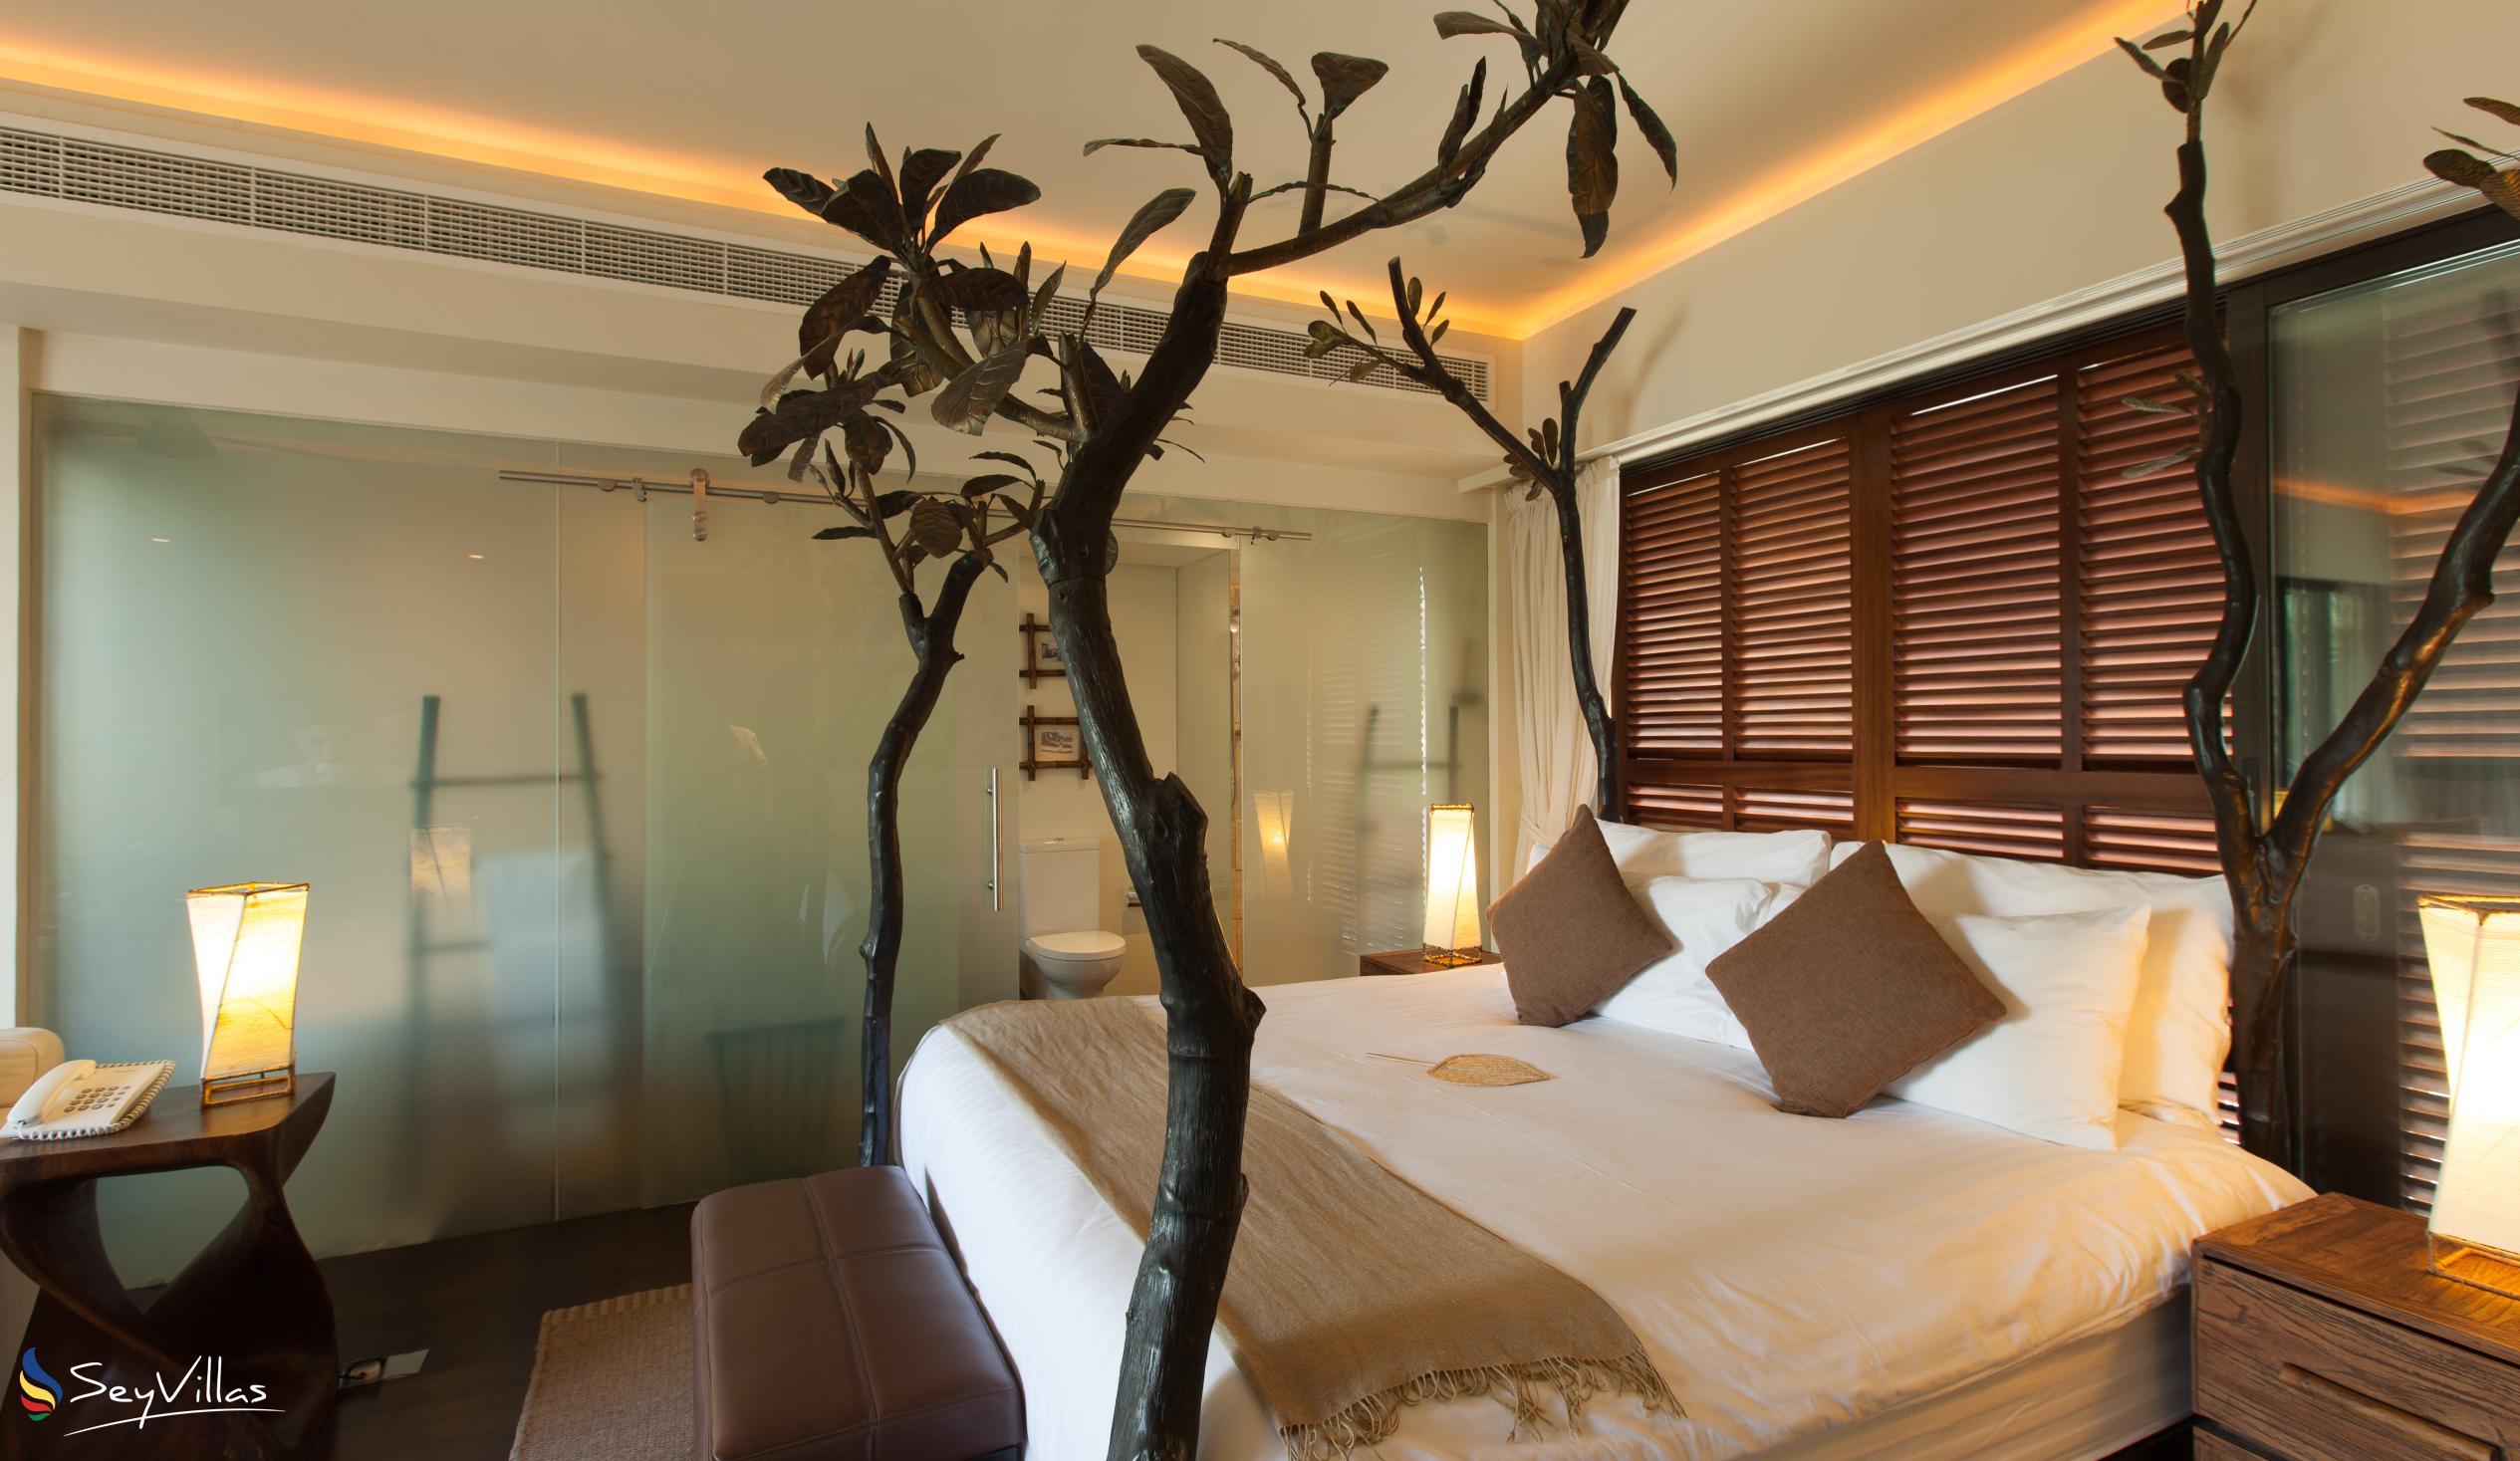 Photo 43: Dhevatara Beach Hotel - Sea View Suite with Kingsize Bed - Praslin (Seychelles)